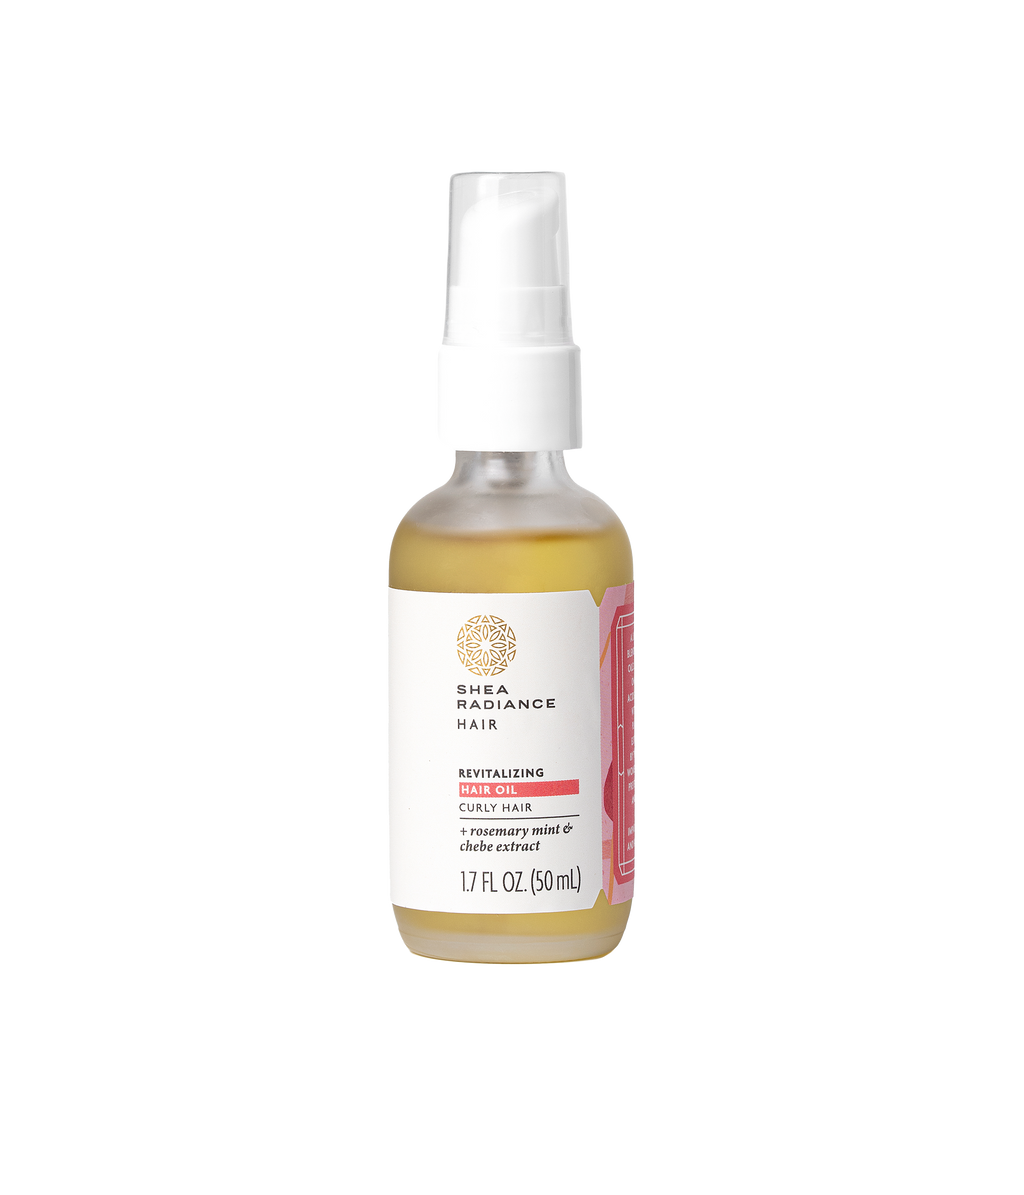 Revitalizing Hair Growth Oil with Chebe Extract – Shearadiance